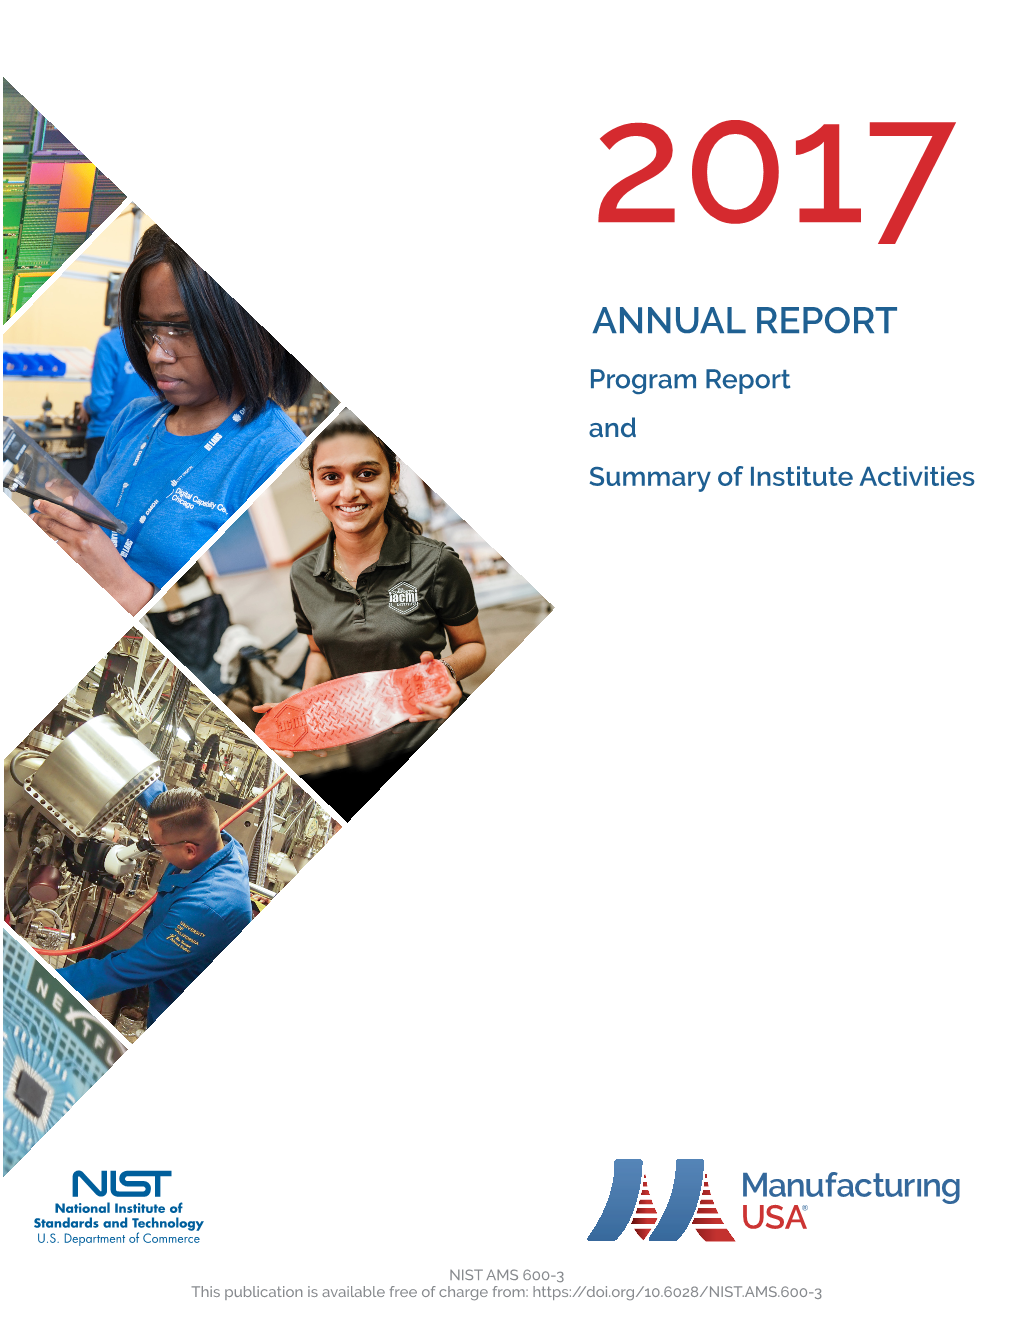 Manufacturing USA Annual Report, Fiscal Year 2017